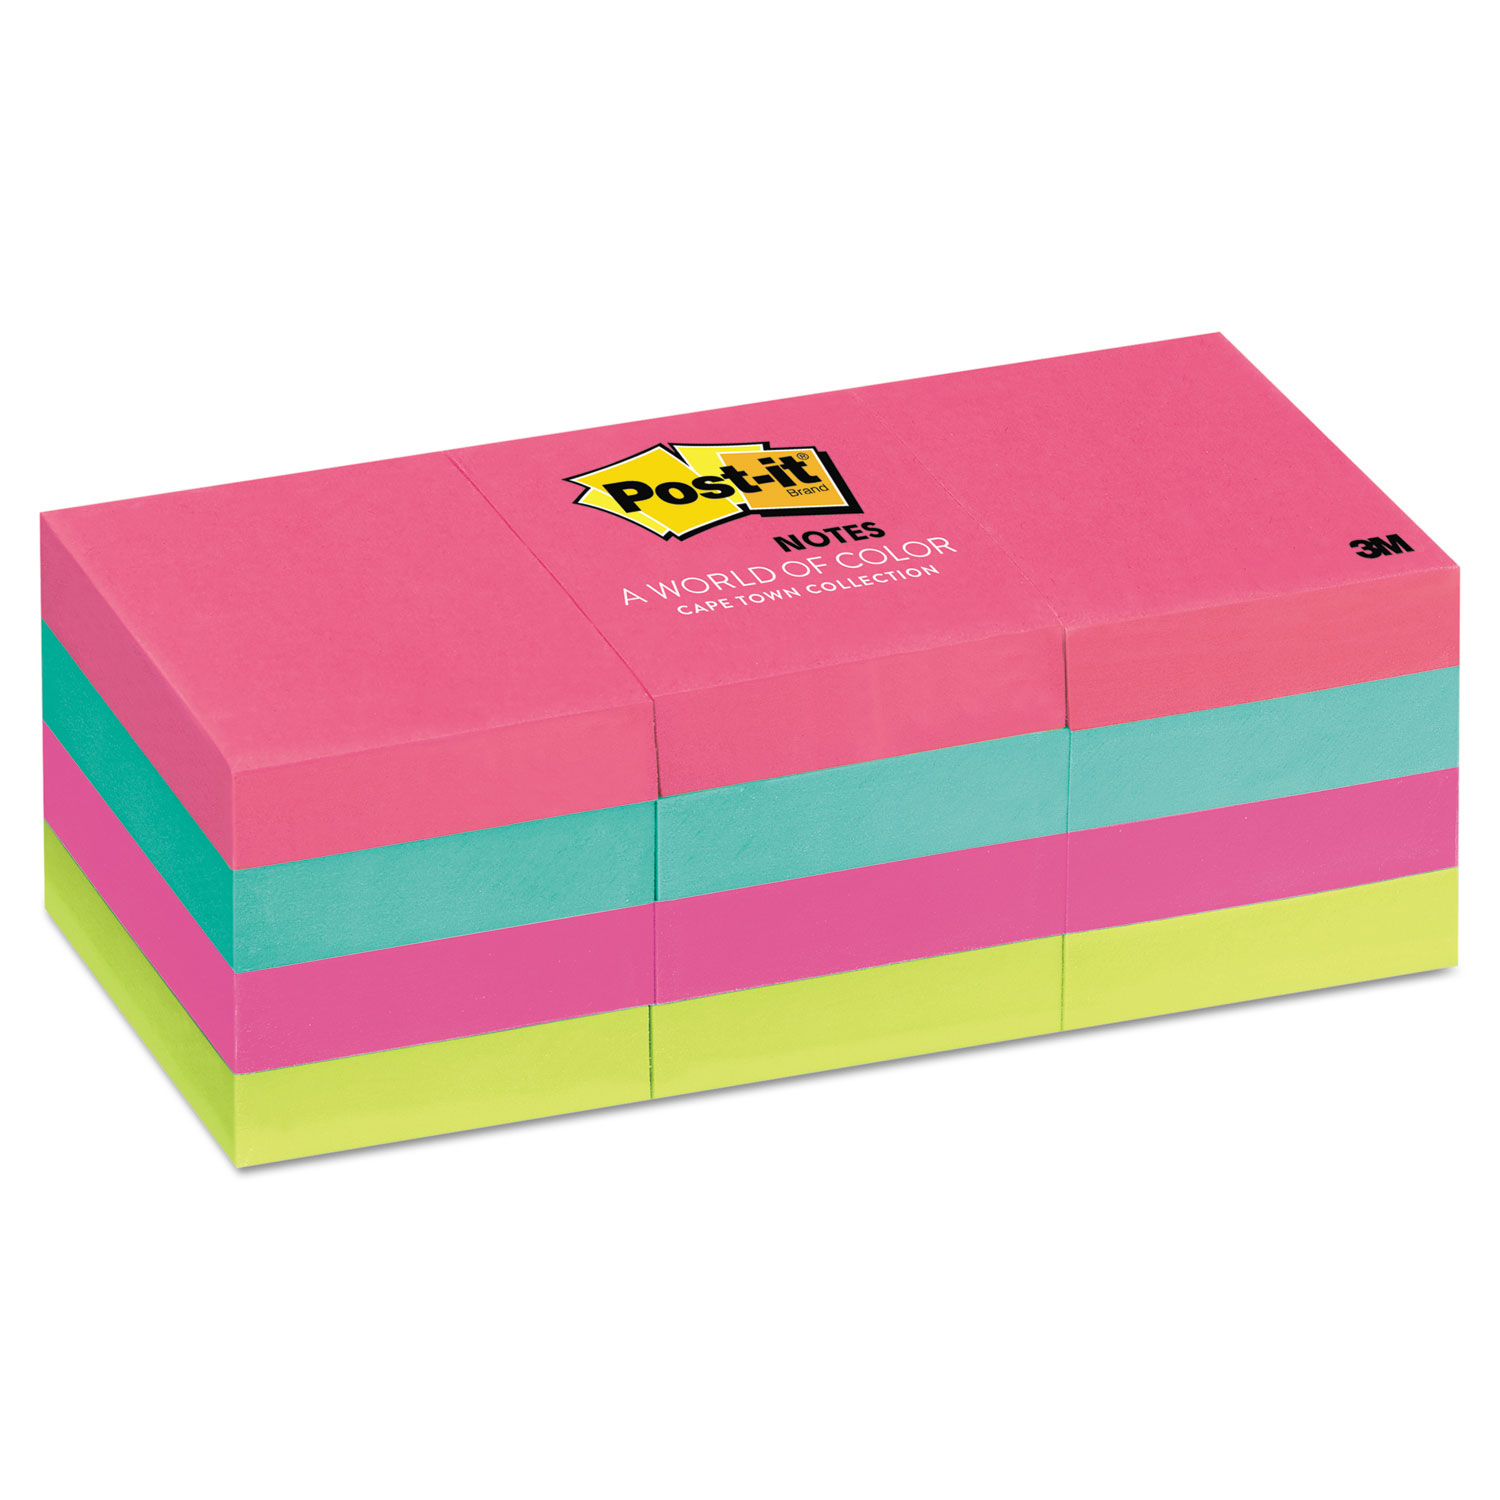  Post-it Notes 653AN Original Pads in Cape Town Colors, 1 3/8 x 1 7/8, 100-Sheet, 12/Pack (MMM653AN) 